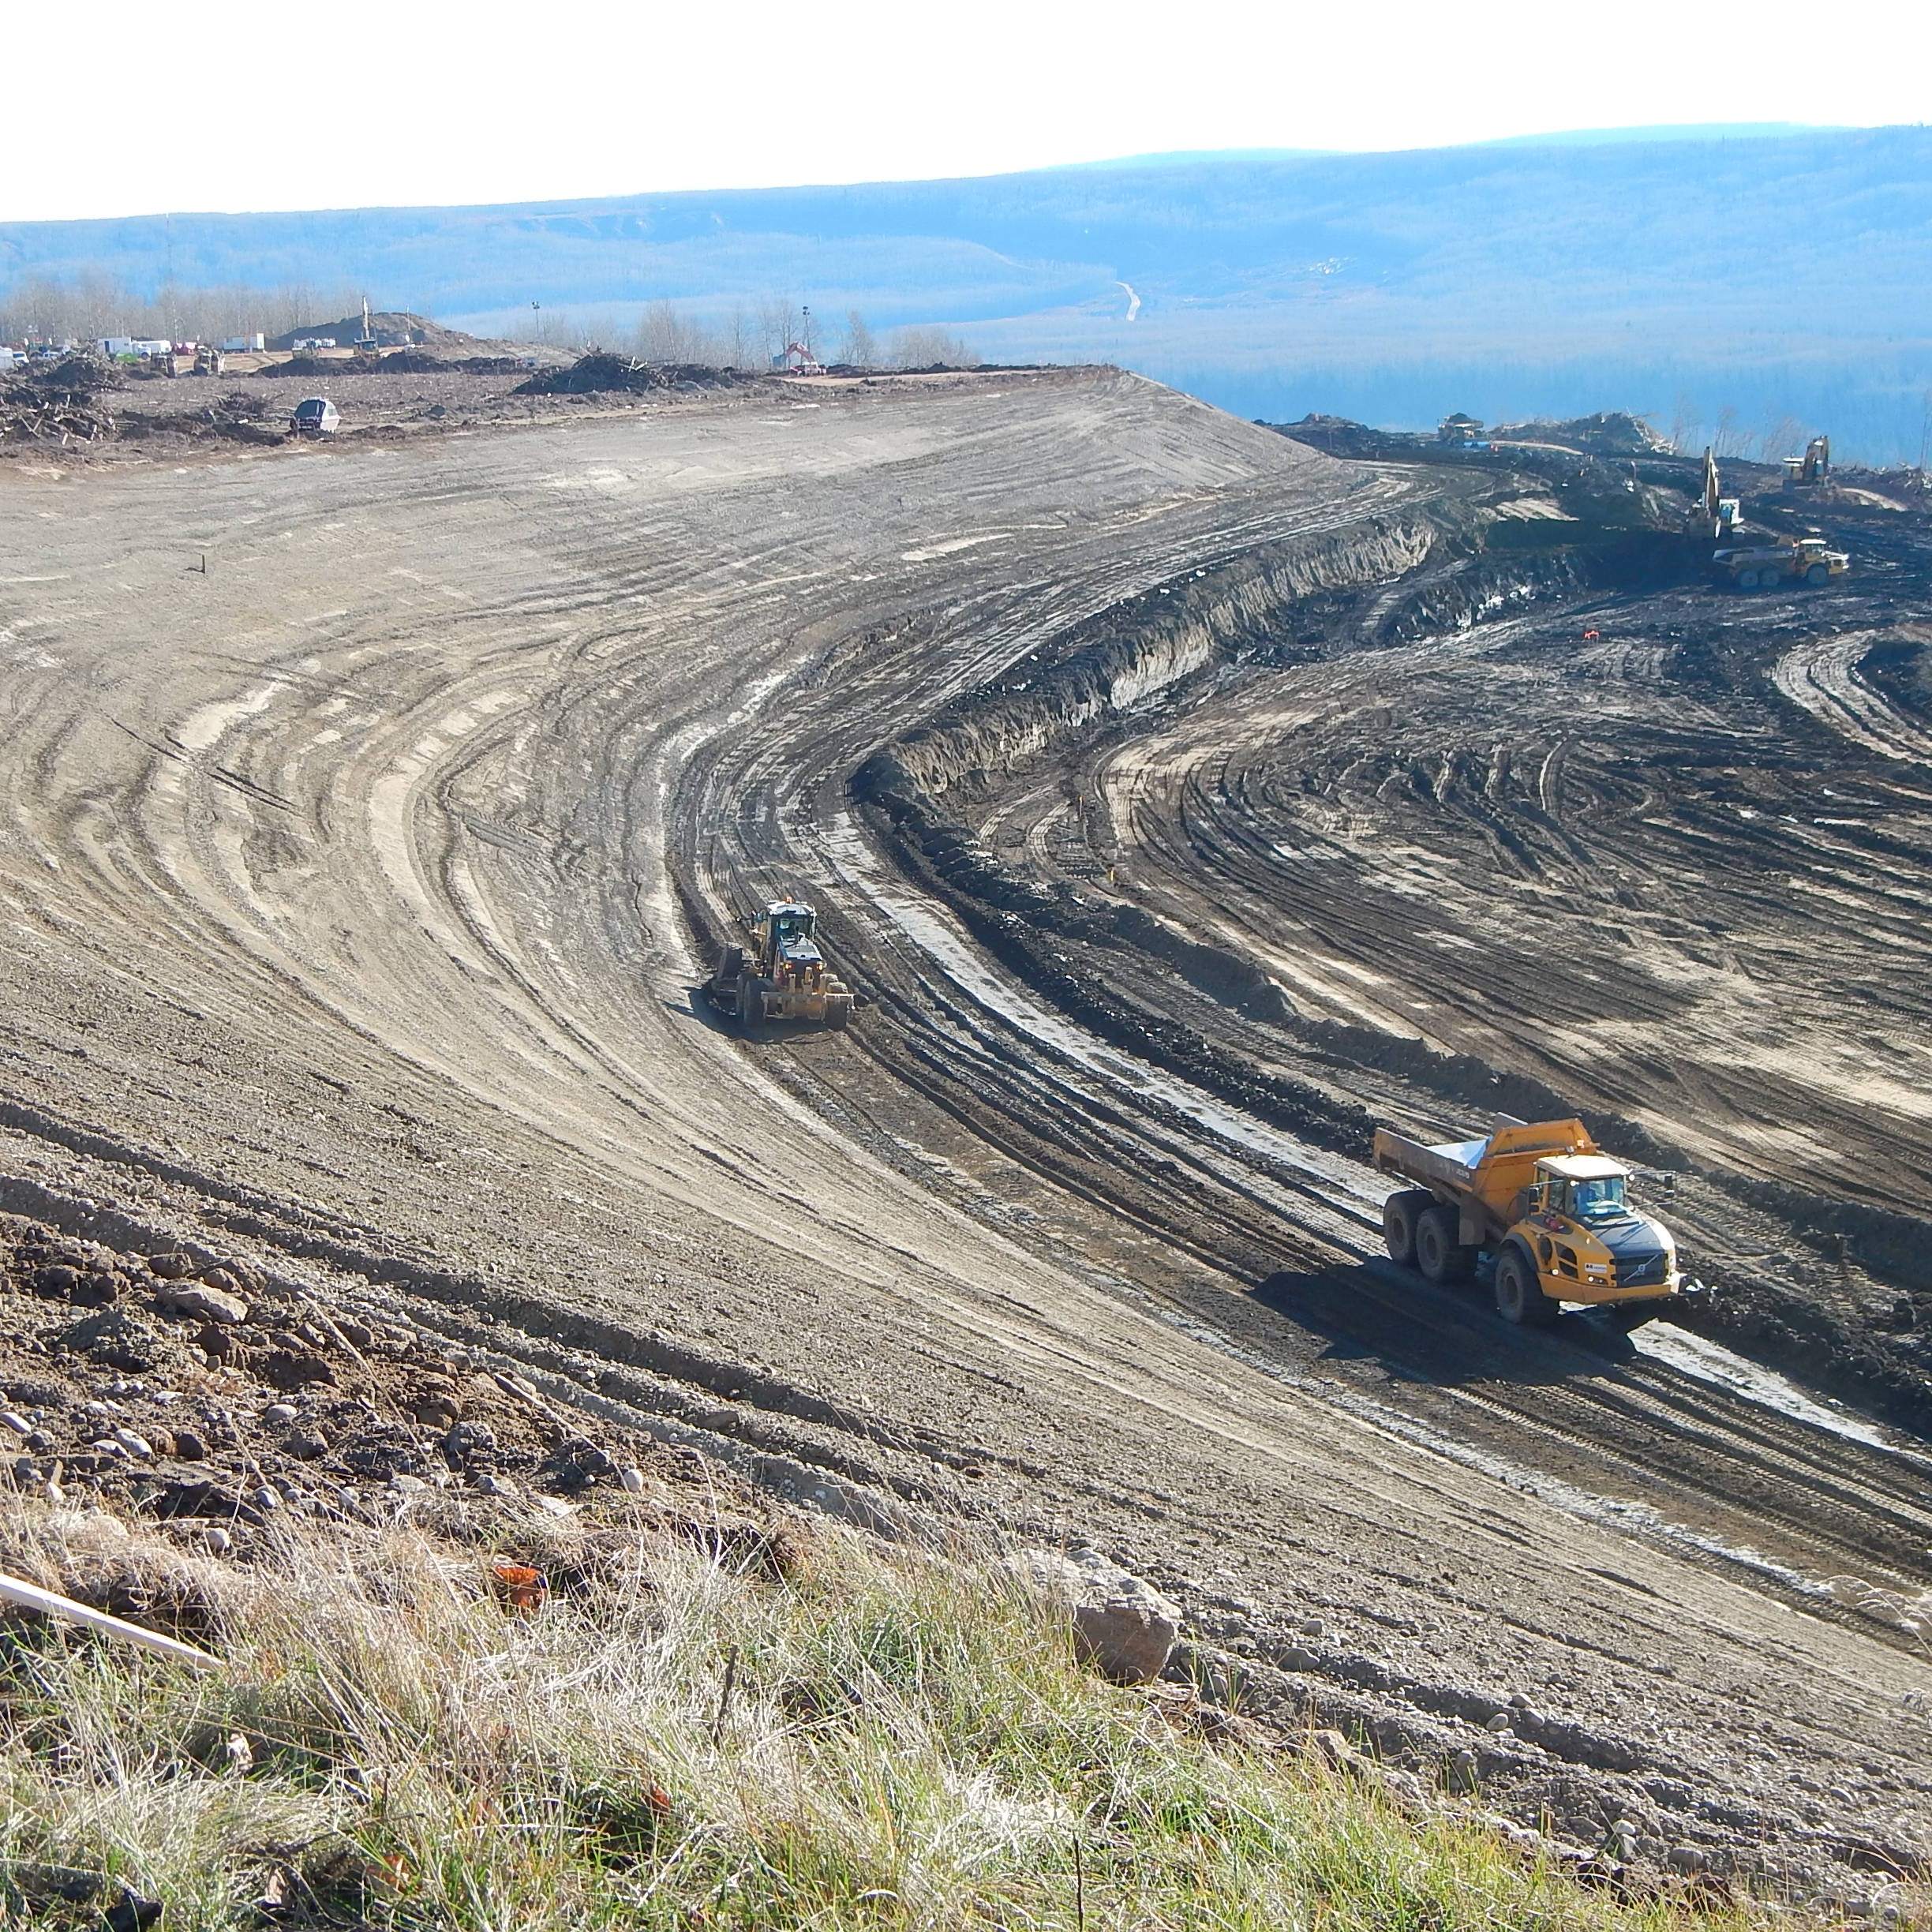 Episode 117: Site C gets approved